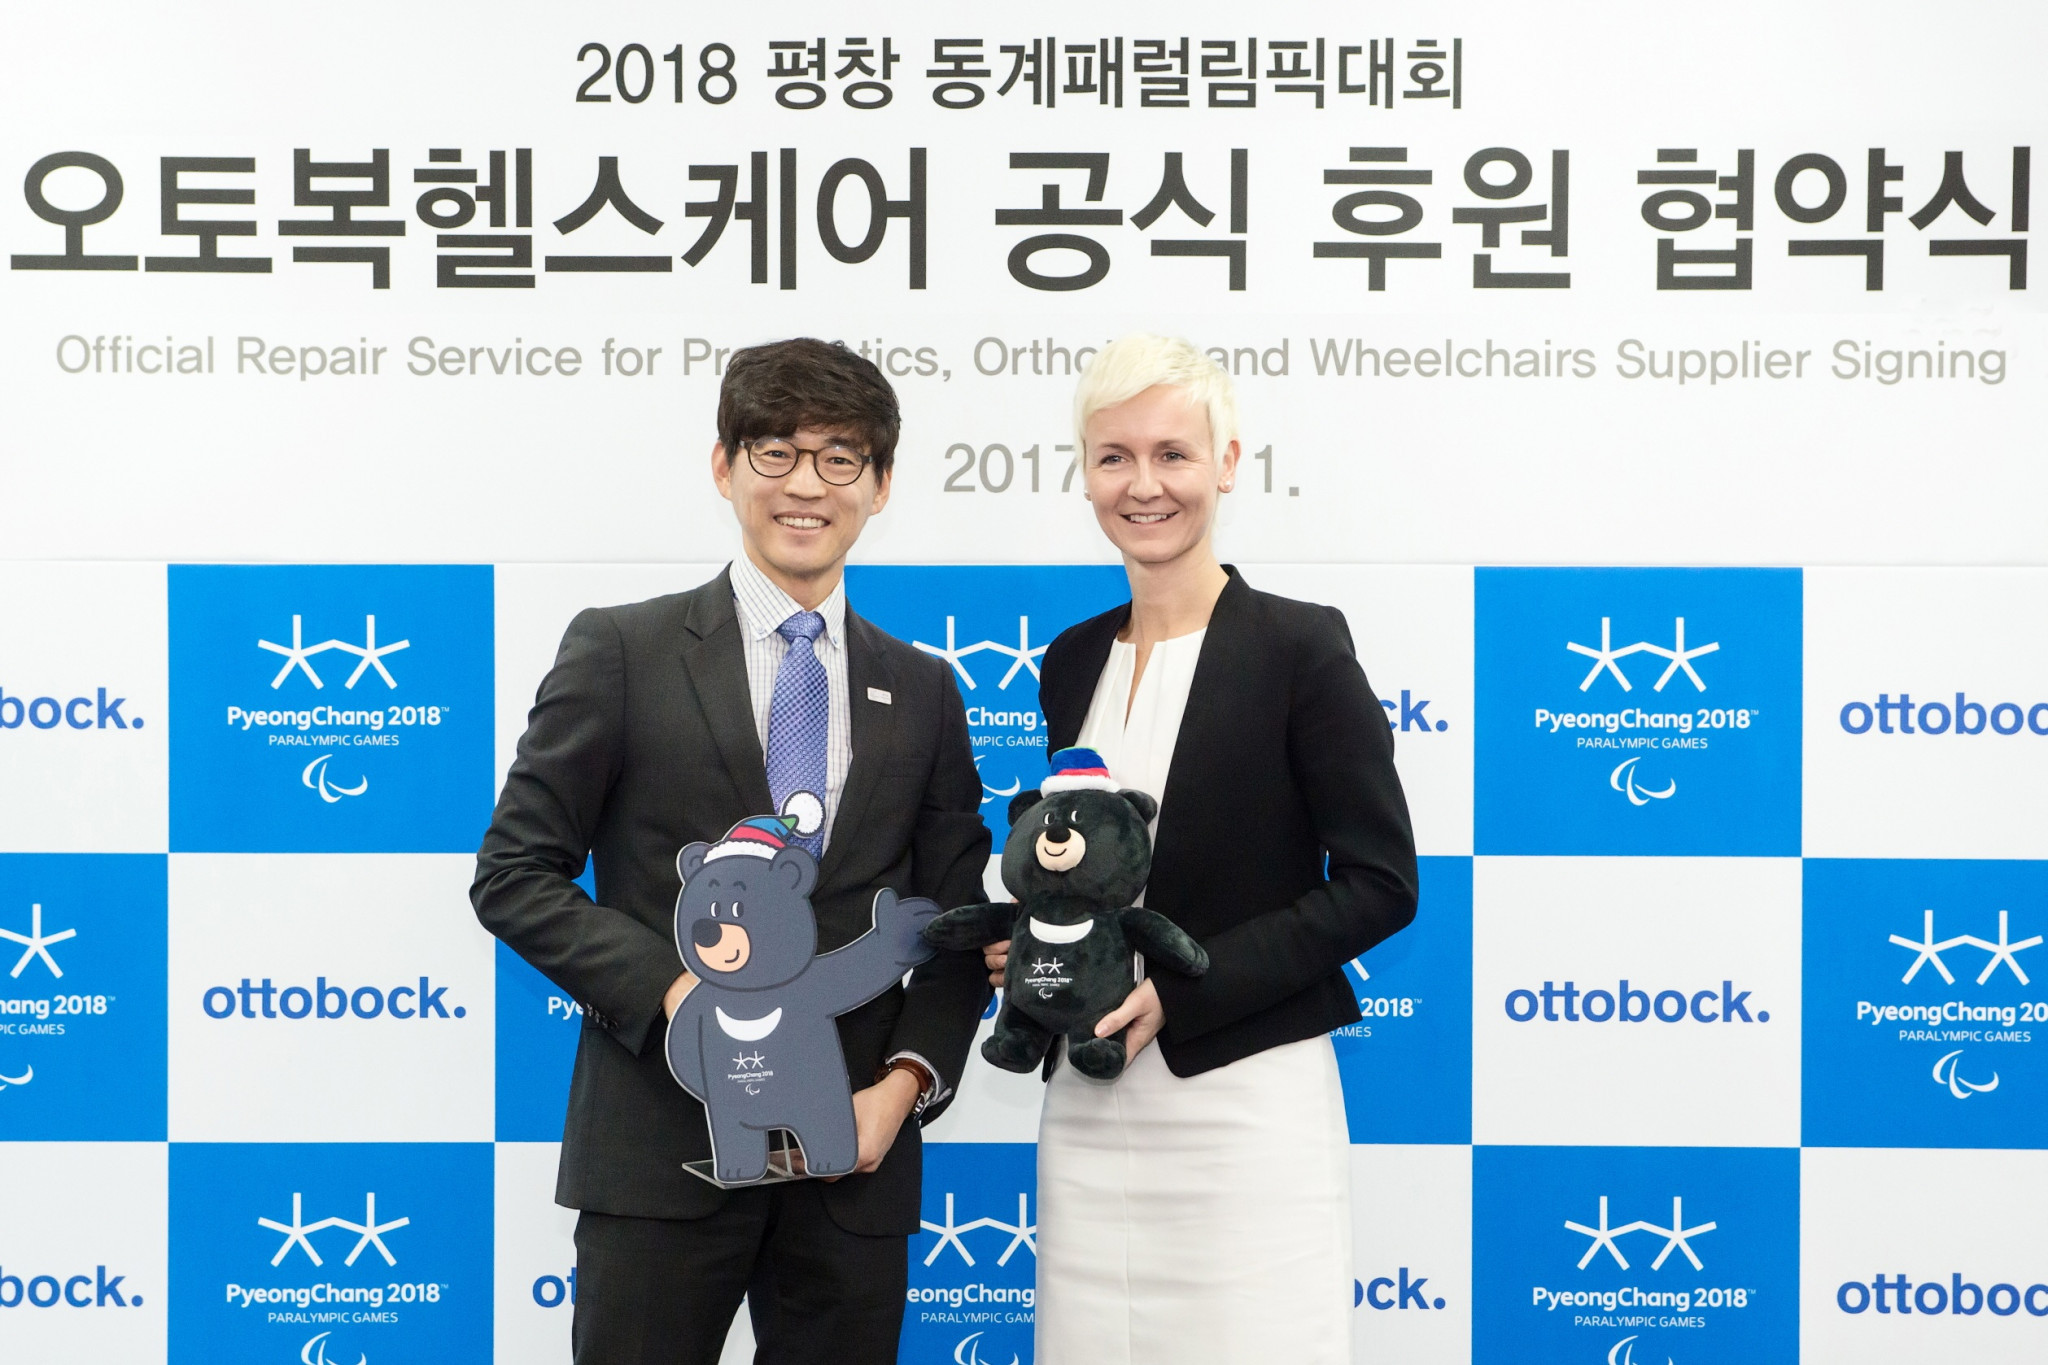 Ottobock extend long-term support of Paralympic Games with Pyeongchang 2018 agreement